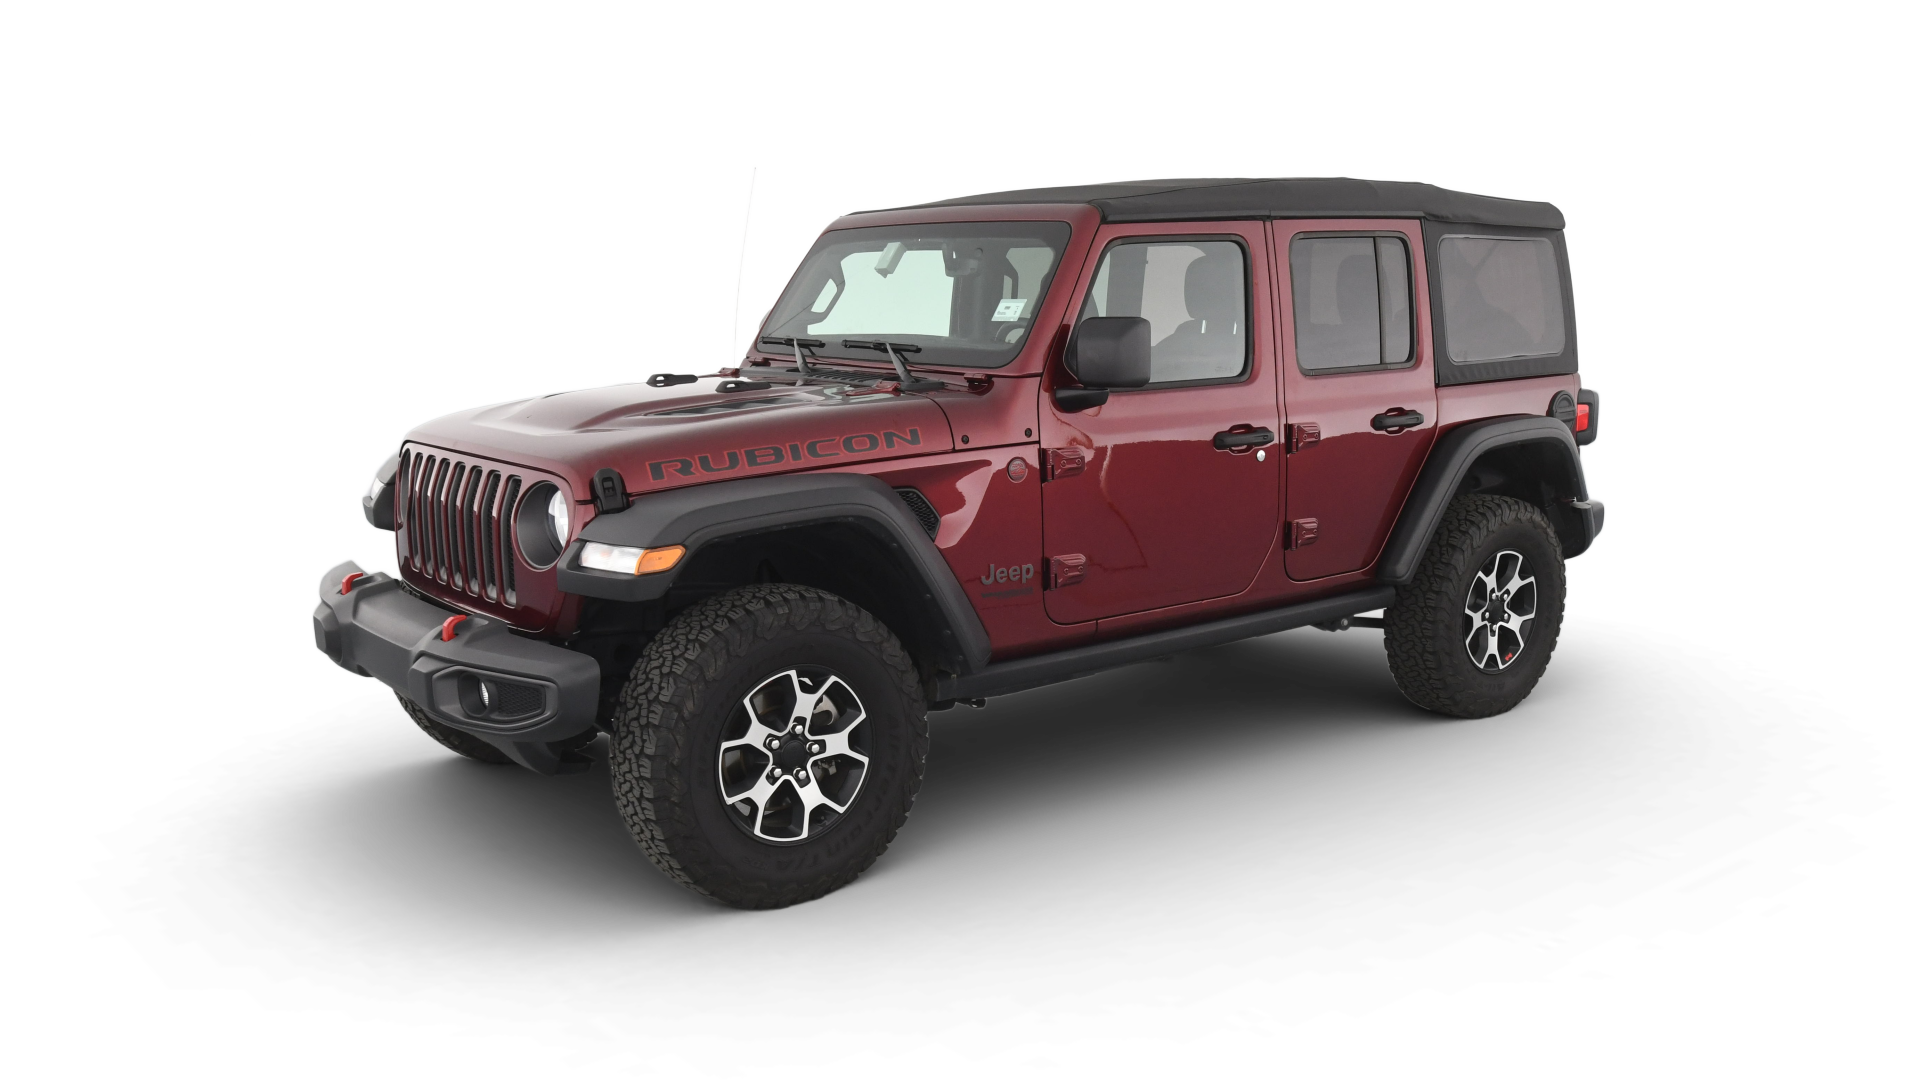 Used Jeep Wrangler Unlimited Rubicon For Sale Online | Carvana